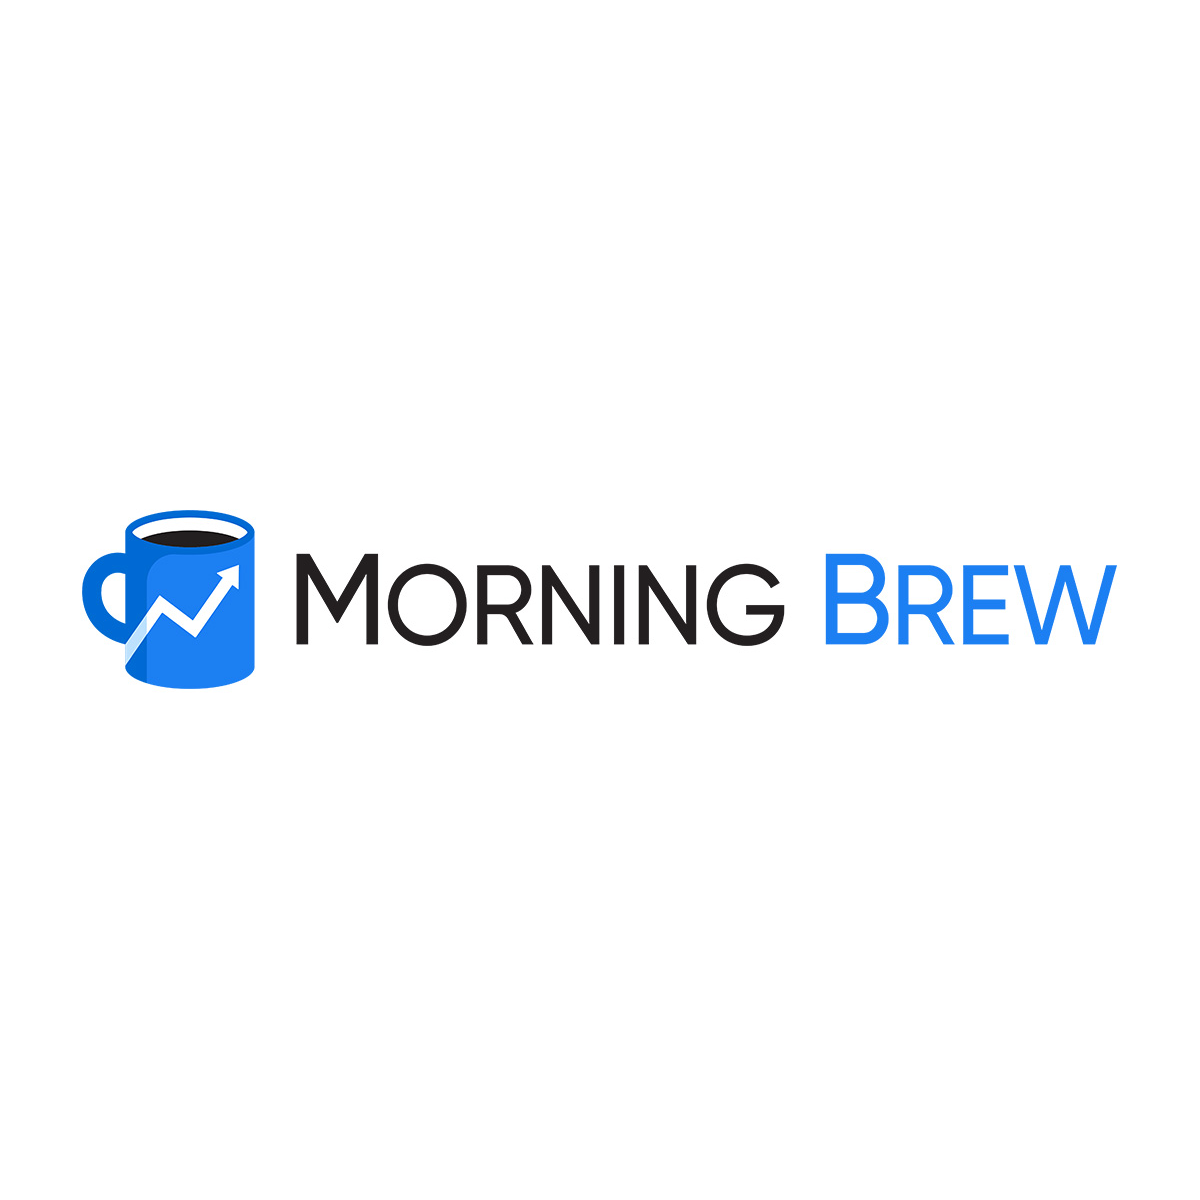 logo for a newsletter called morning brew